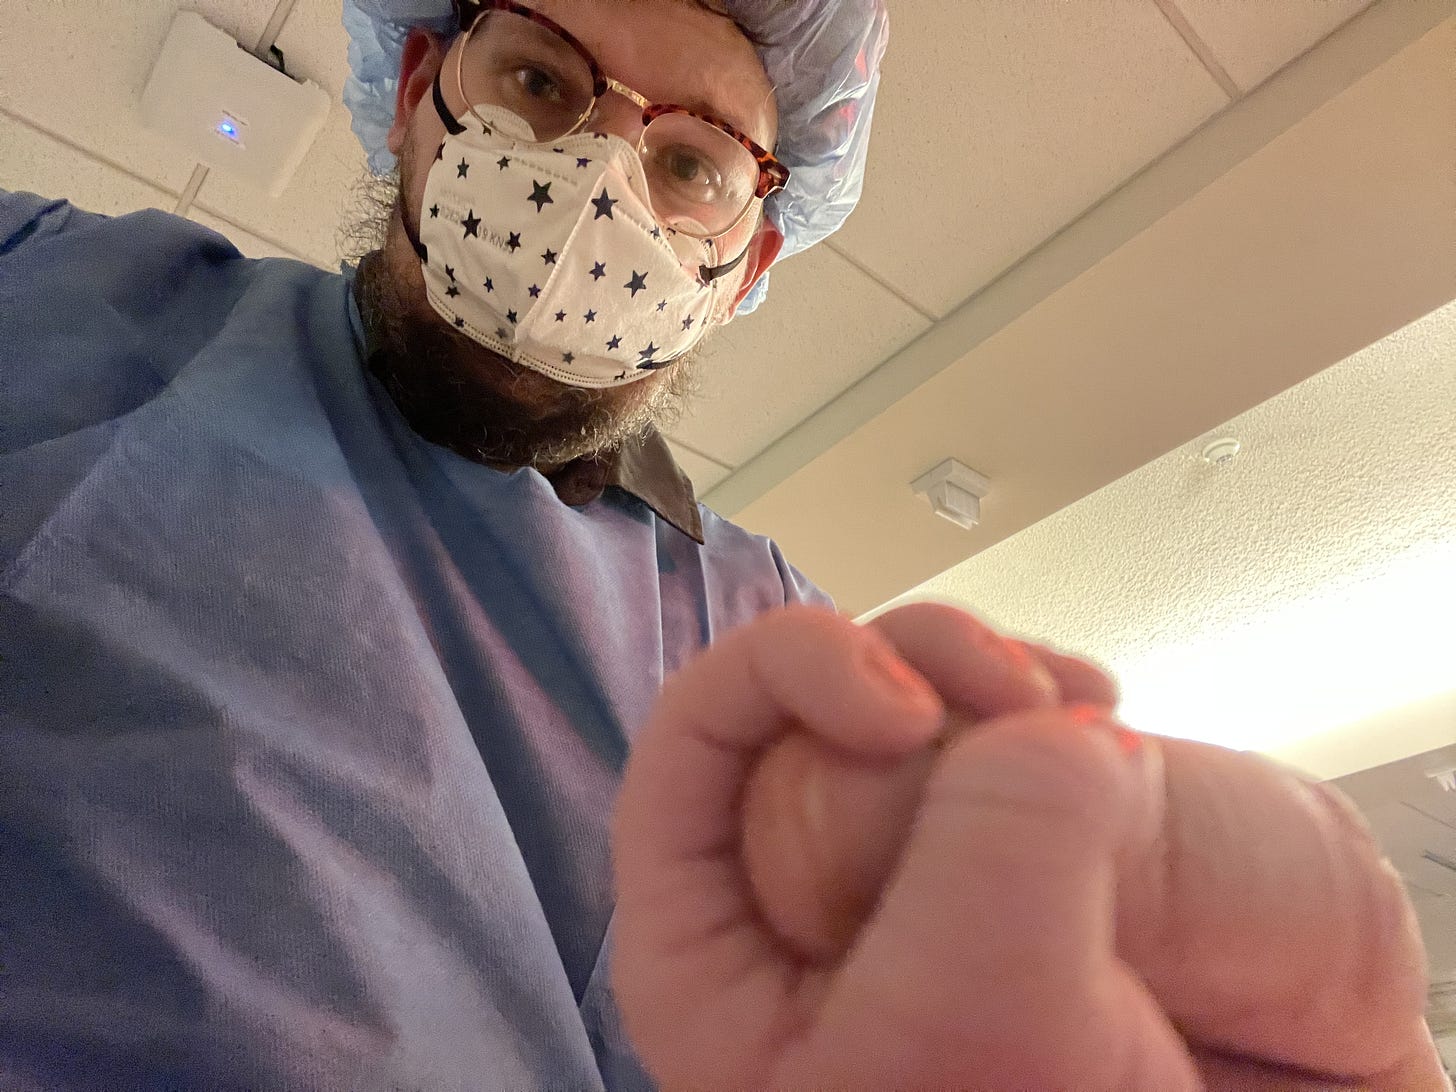 Kelsey Atherton in the NICU, with his finger gripped by the hand of his newborn. It was a sensor-rich environment, this selfie camera was about the least intrusive angle.